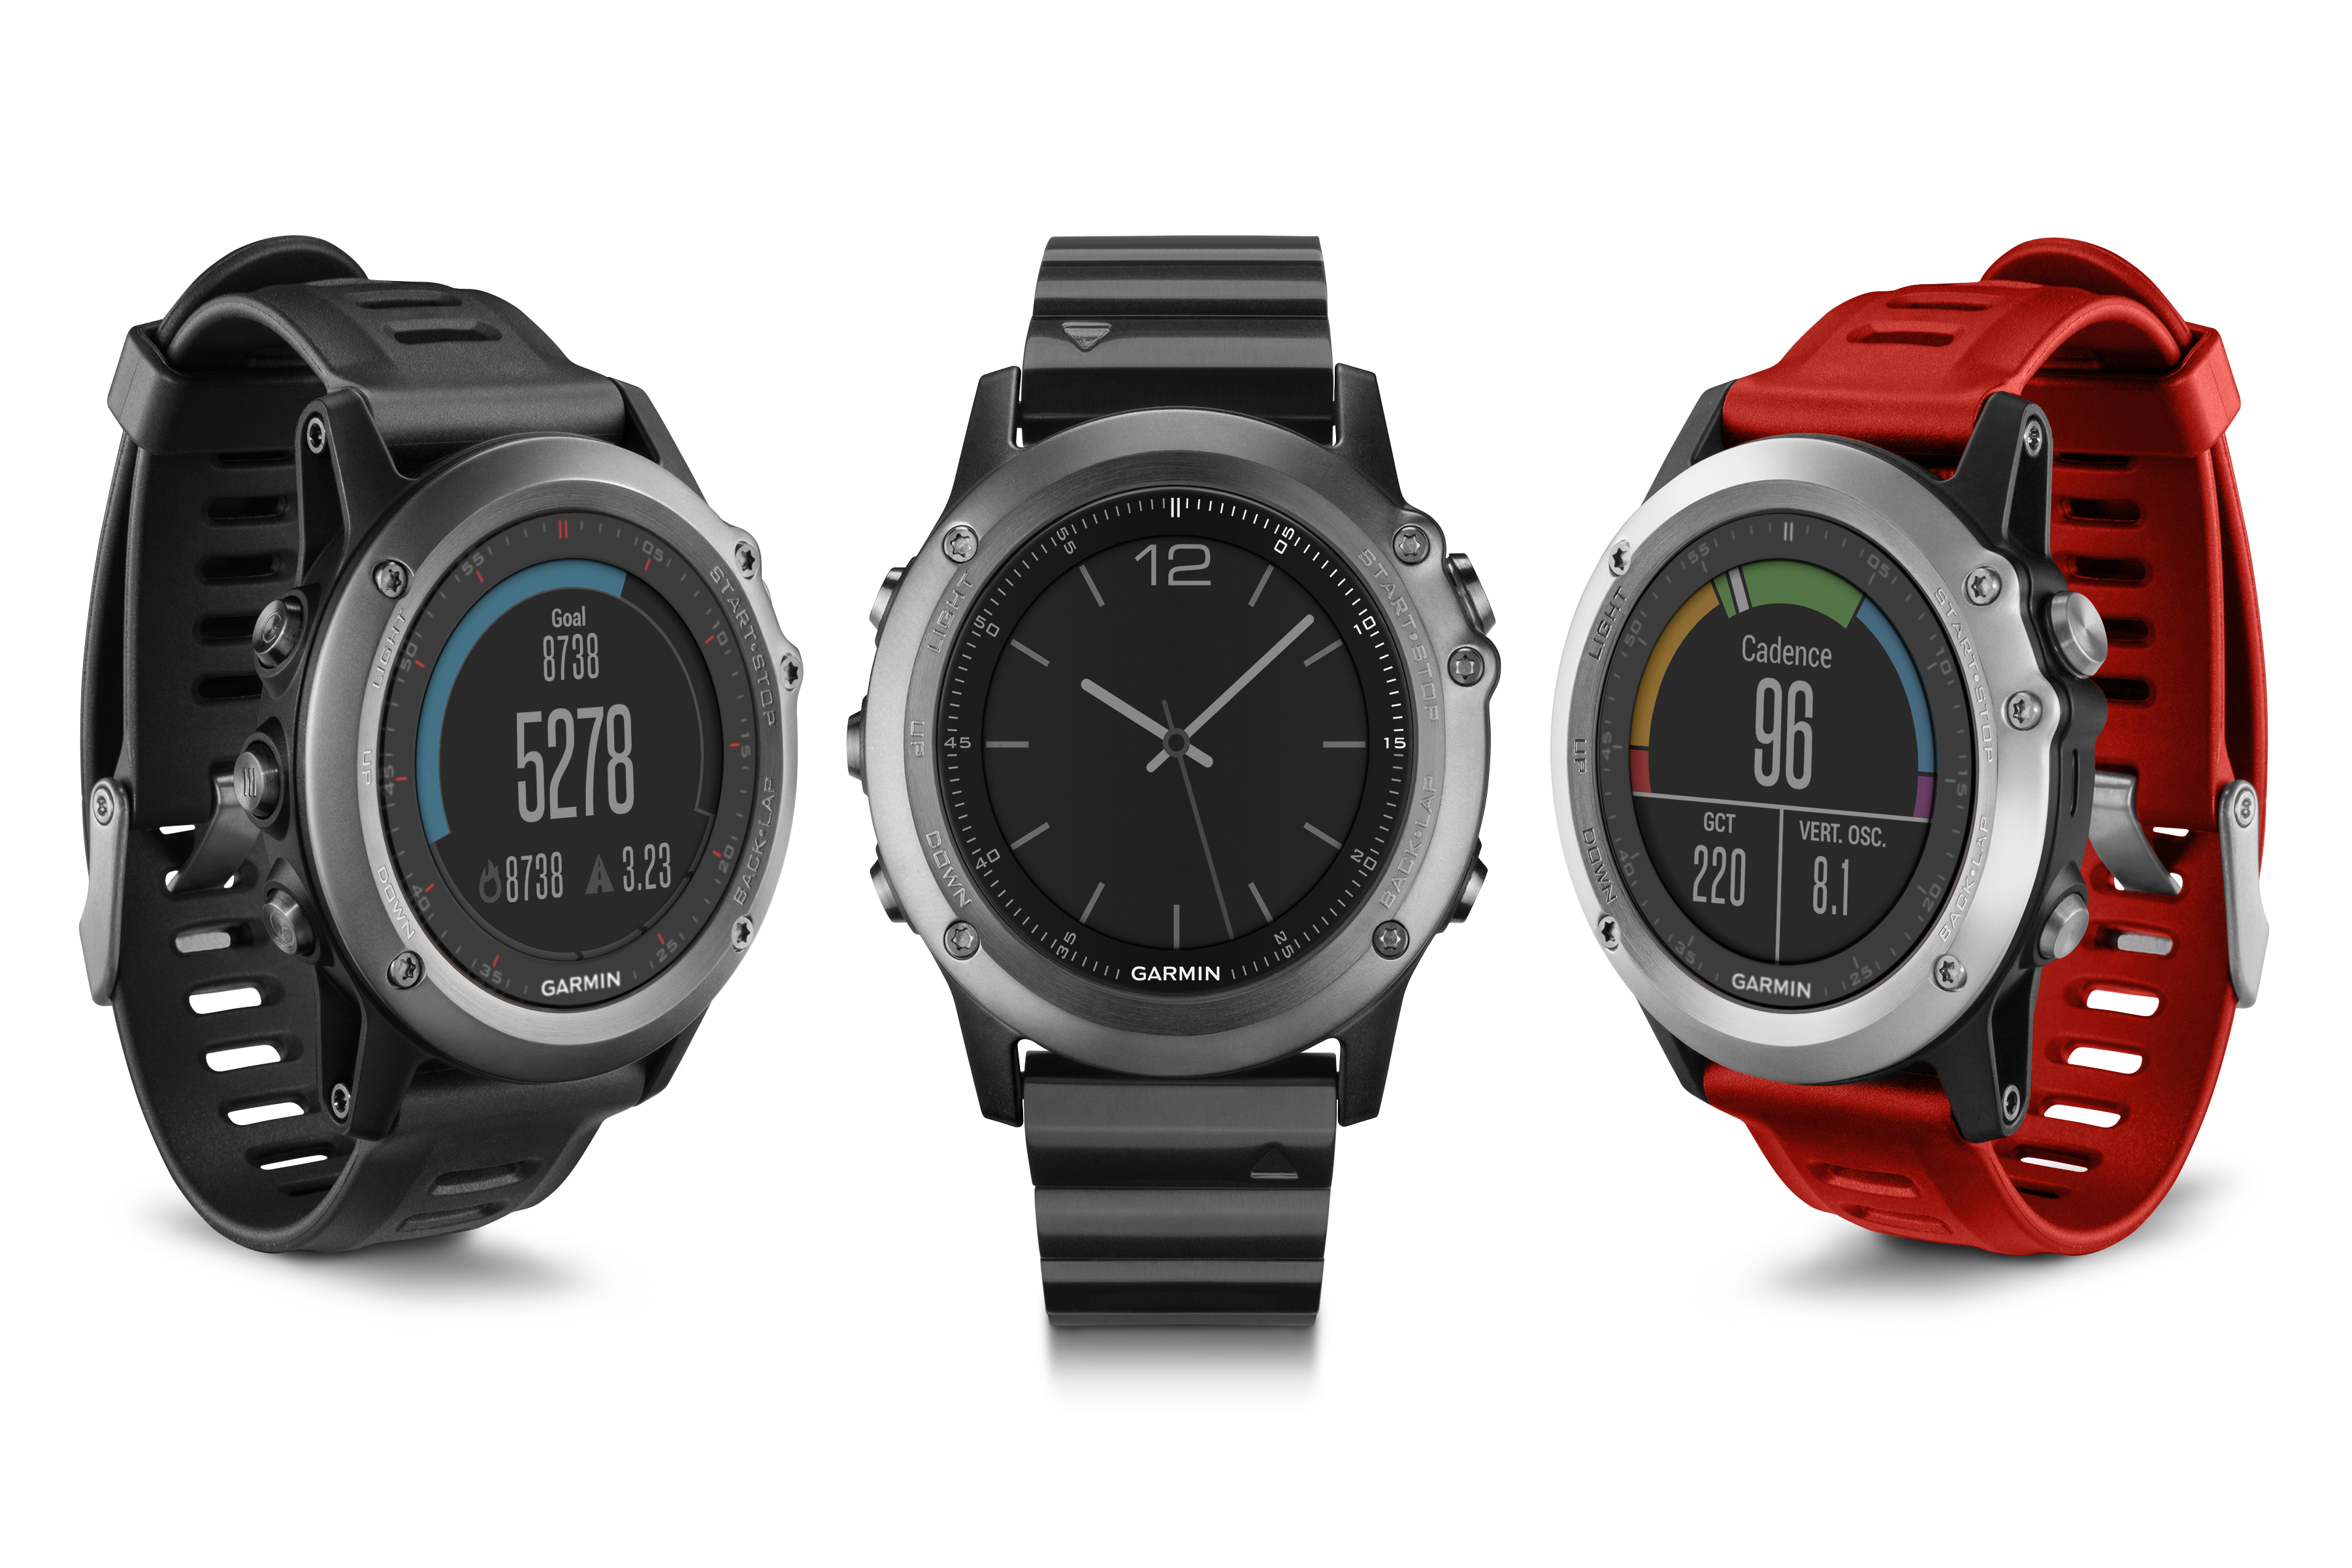 Photo: The Fenix 3 is a new GPS-enabled training watch from Garmin. 